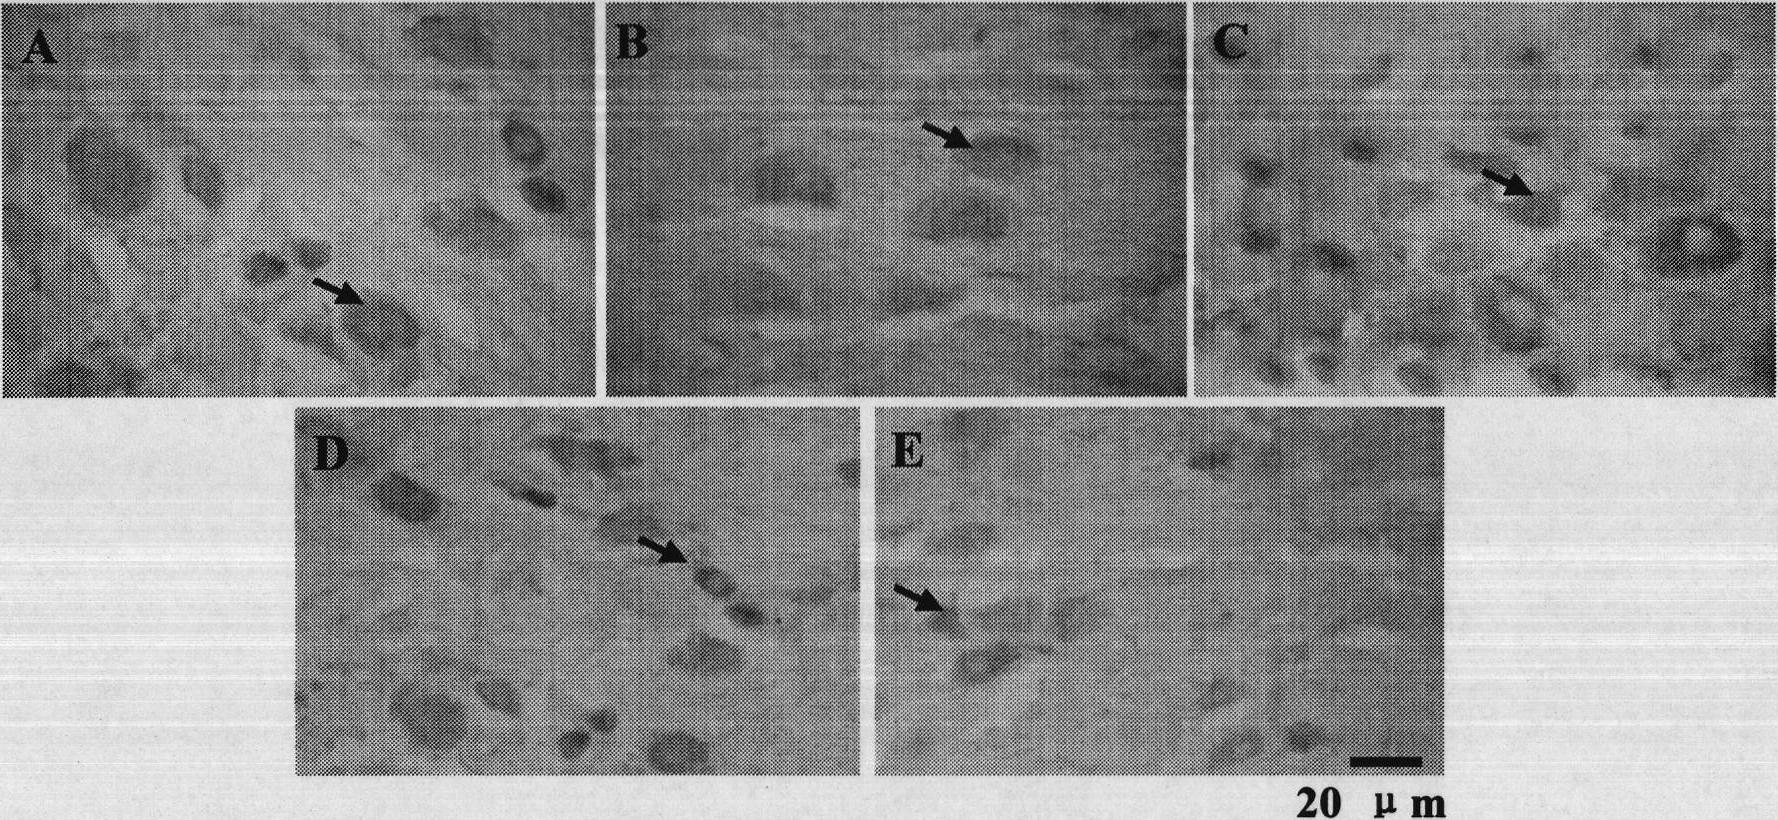 Application of puerarin to preparing medicine for treating P2X3 receptor mediated nerve system disease